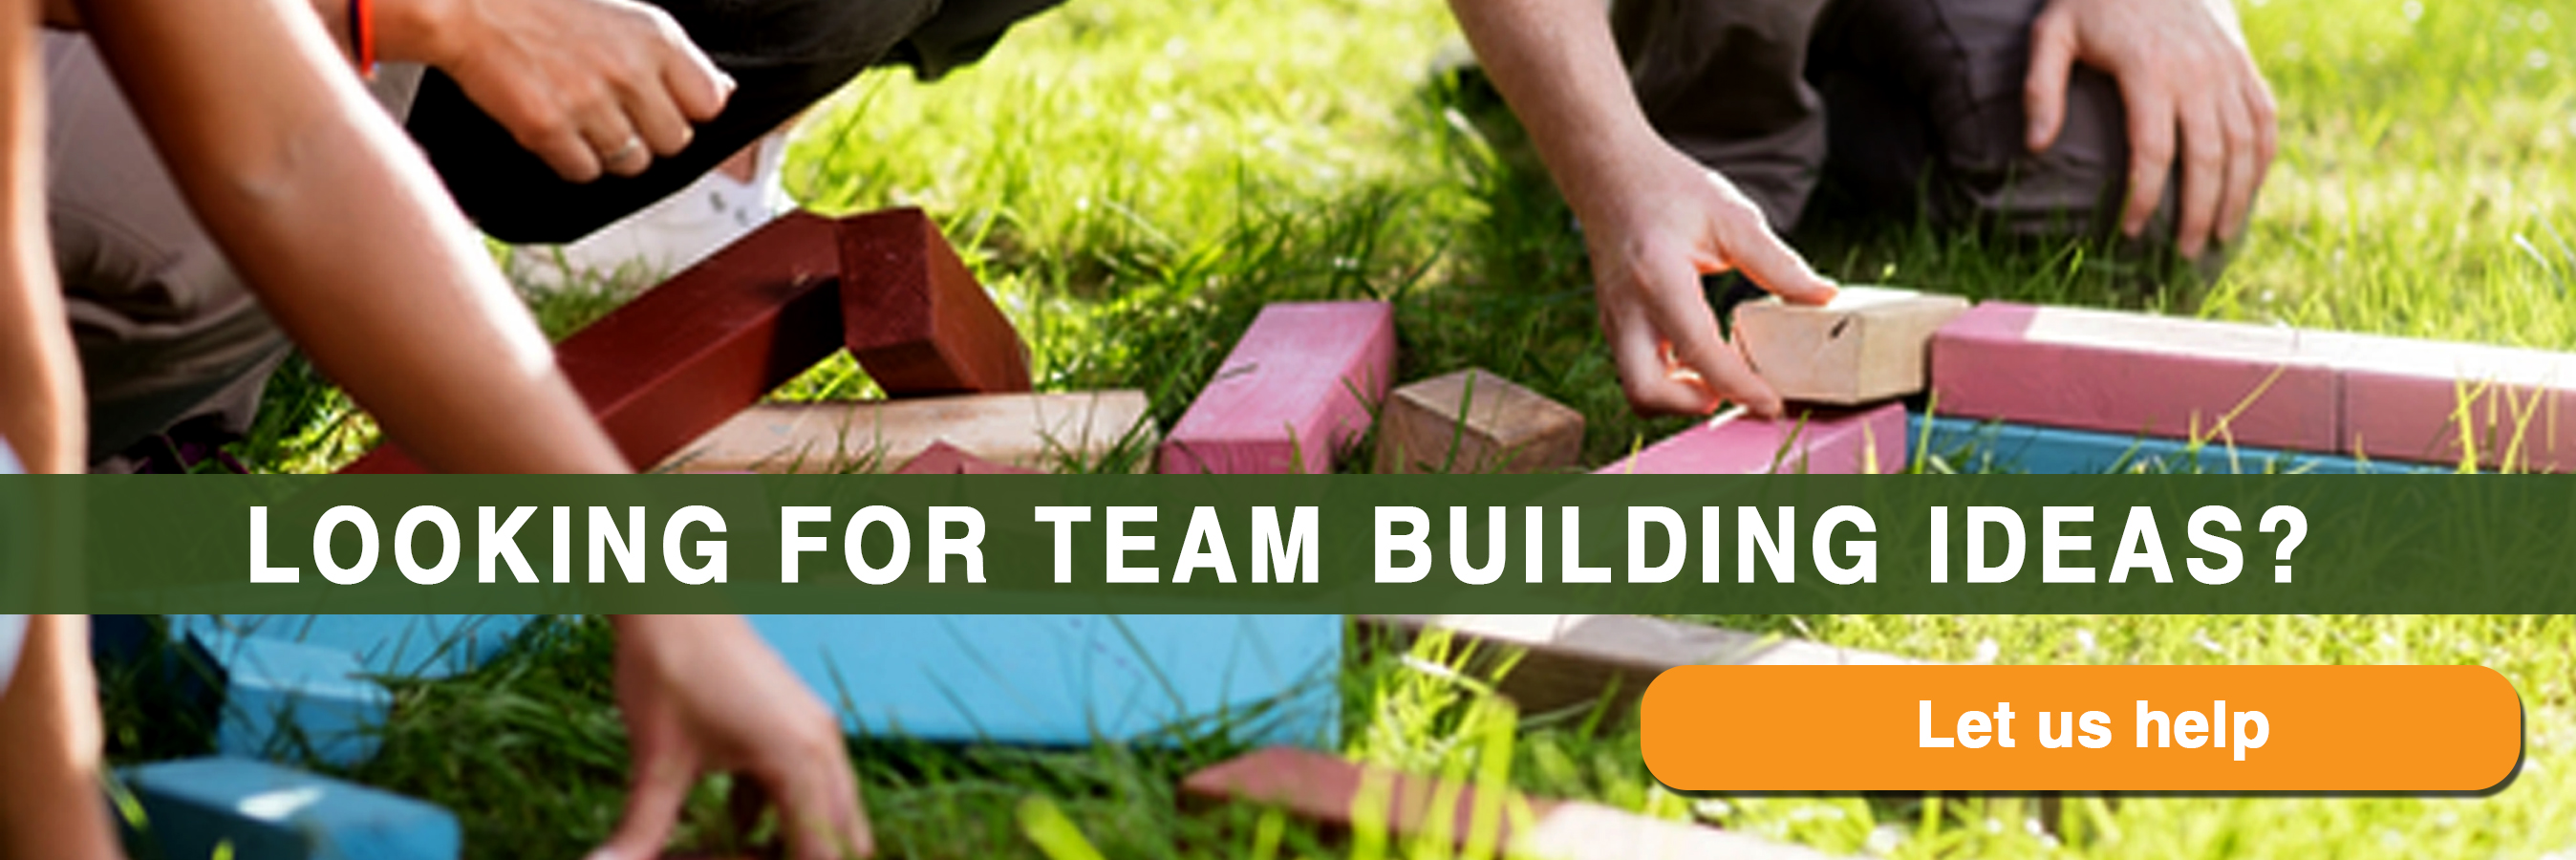 Looking For Team Building Ideas?